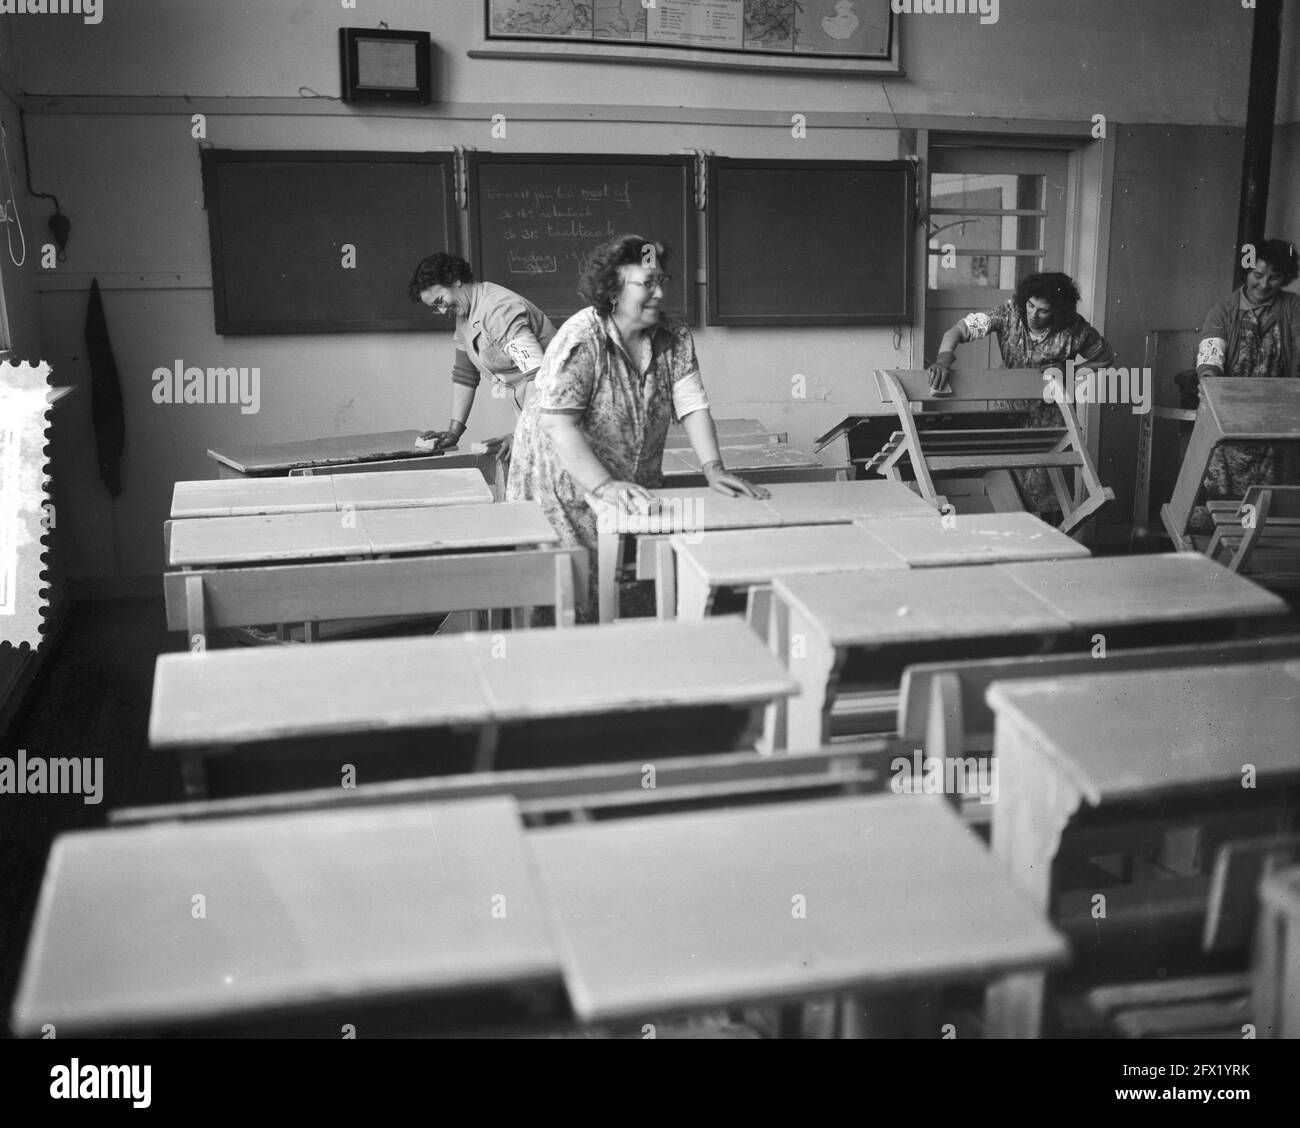 Final preparation return residents Oostzaan, cleaning schoolroom, January 28, 1960, PREPARATIONS, residents, schoolrooms, The Netherlands, 20th century press agency photo, news to remember, documentary, historic photography 1945-1990, visual stories, human history of the Twentieth Century, capturing moments in time Stock Photo